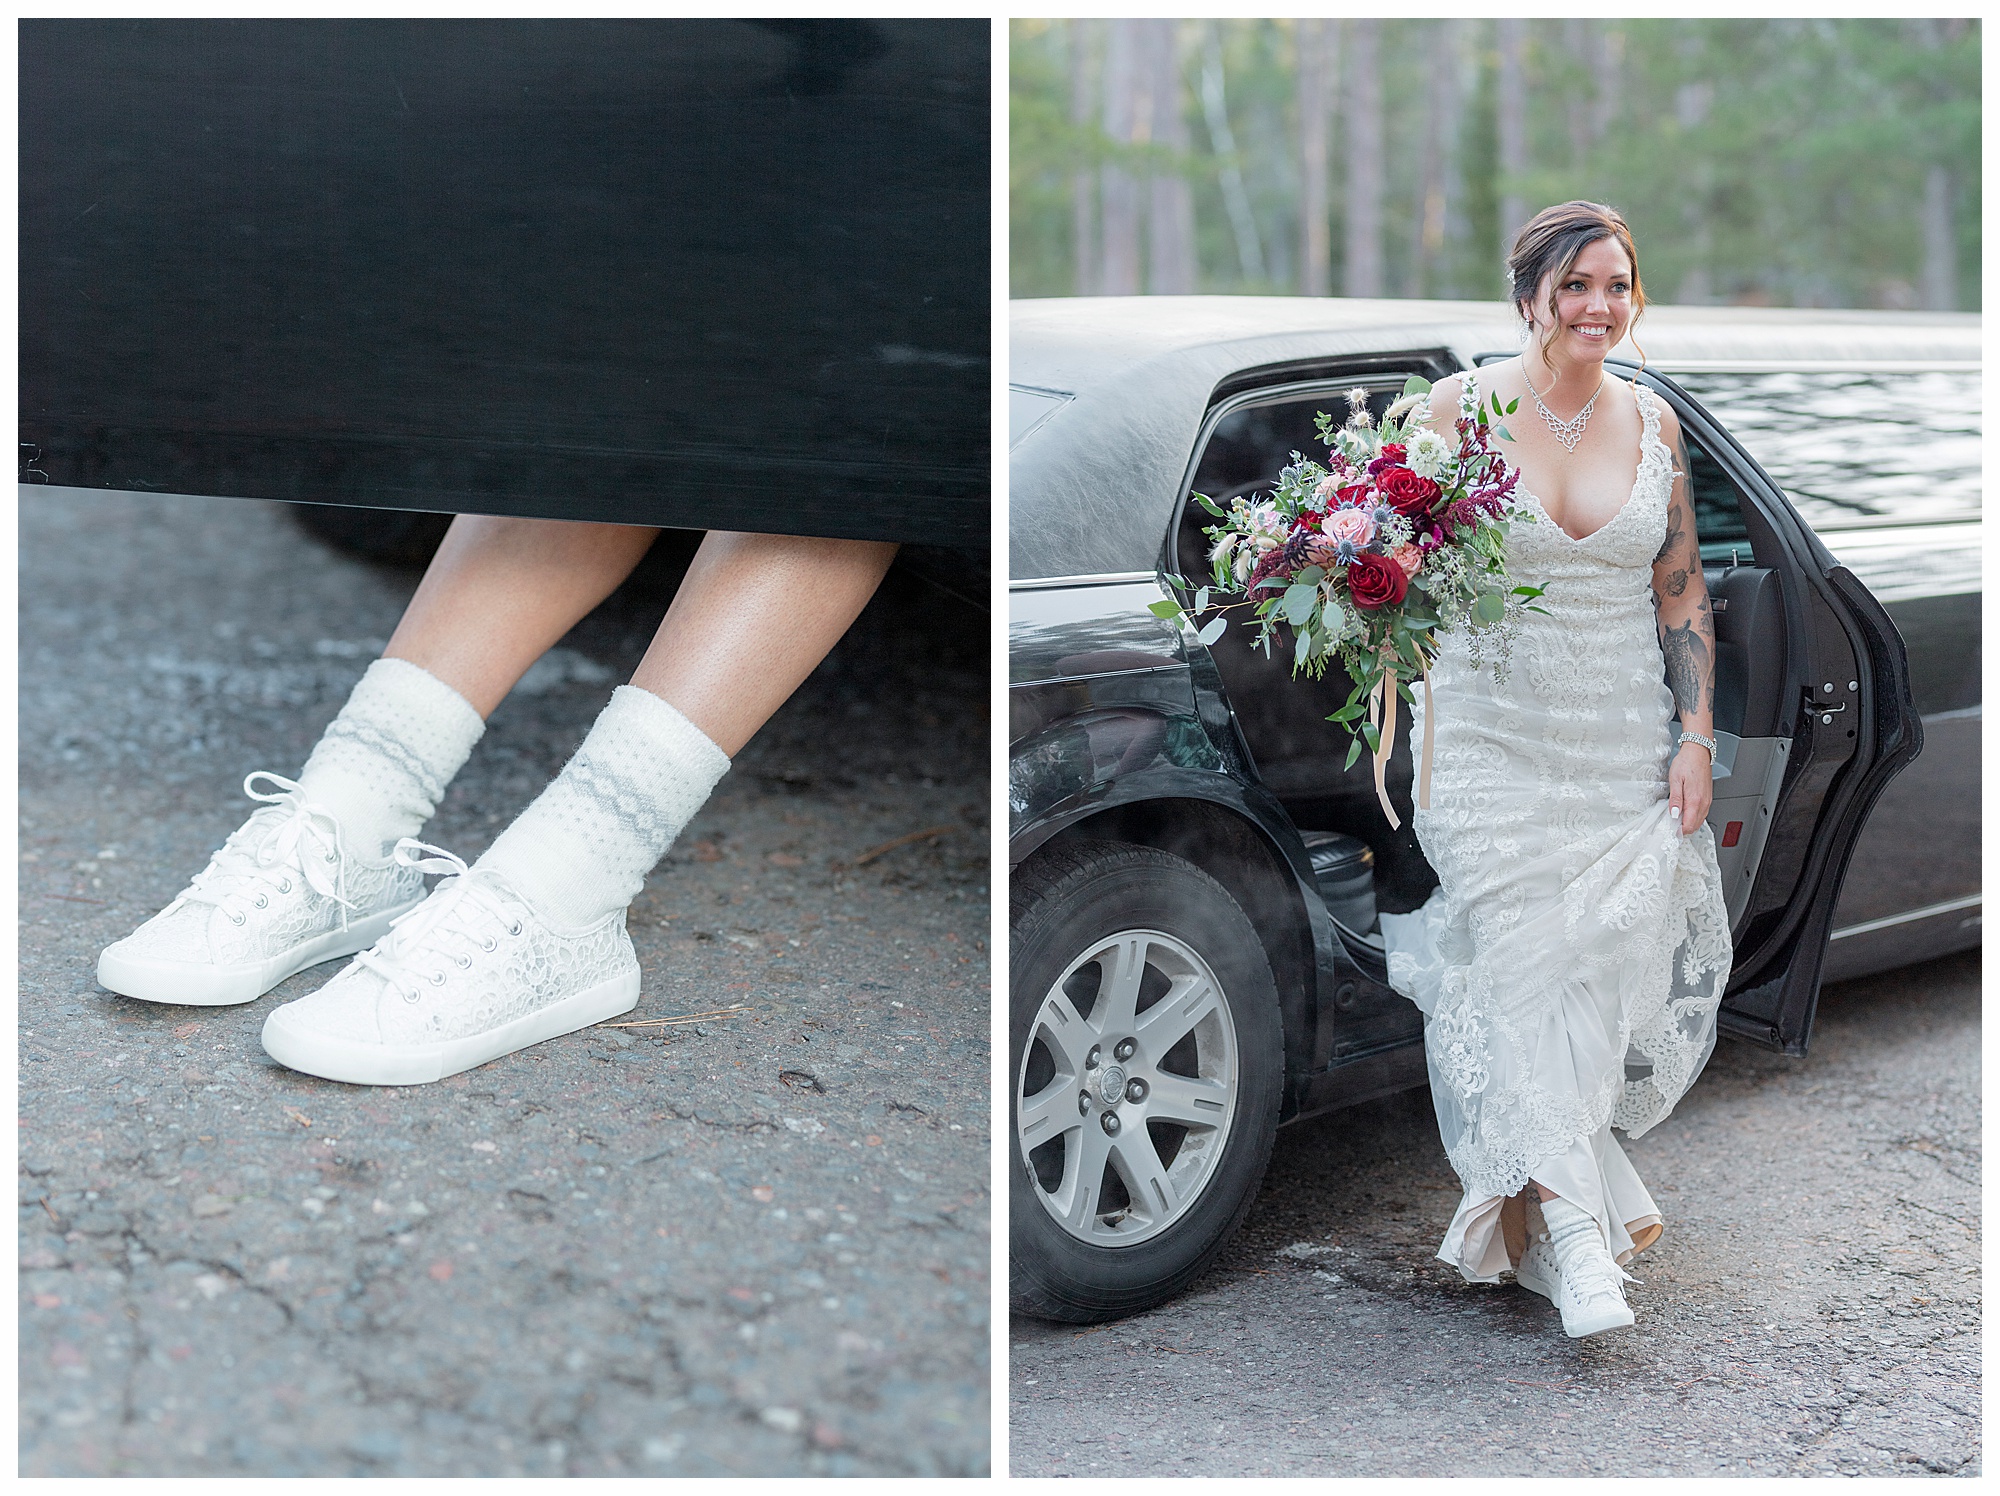 Bride getting out of a limo at a navy and maroon/burgundy state park fall elopement.She's wearing fun sneakers with socks. Photo by Kayla Lee.